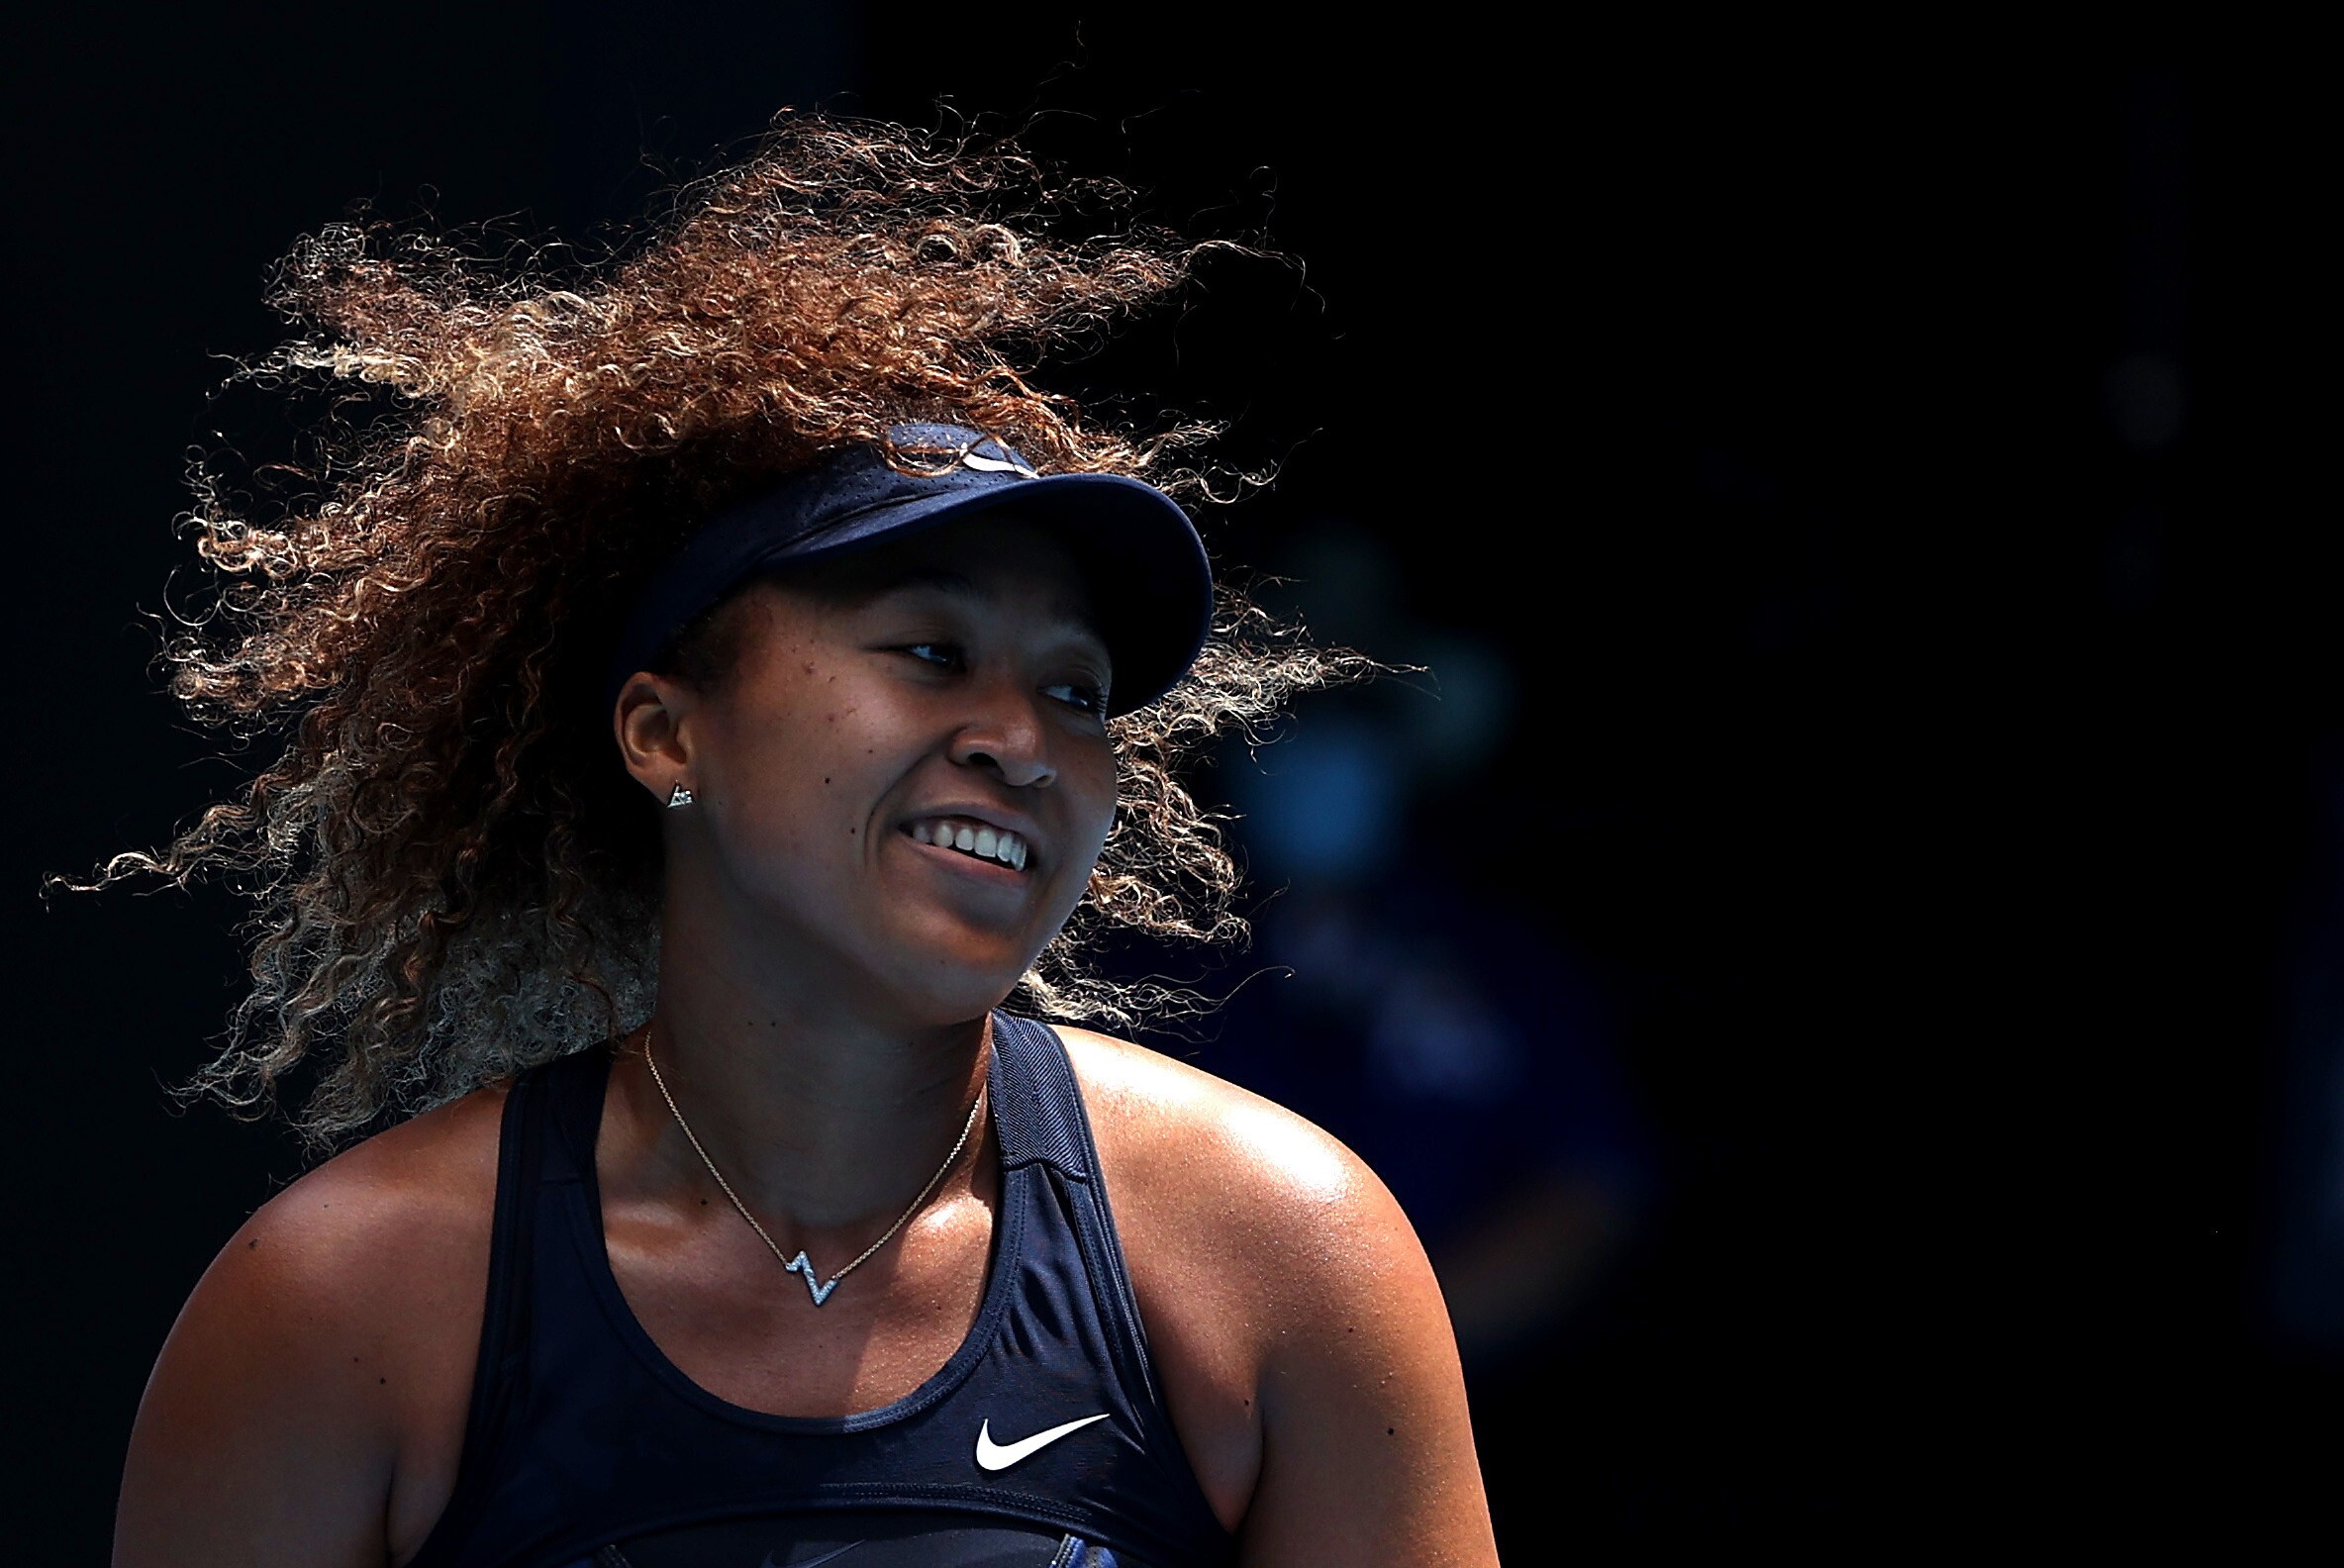 Japan’s Naomi Osaka seals her quarter-final victory against Taiwan’s Hsieh Su-wei at the Australian Open in Melbourne. Photo: Reuters